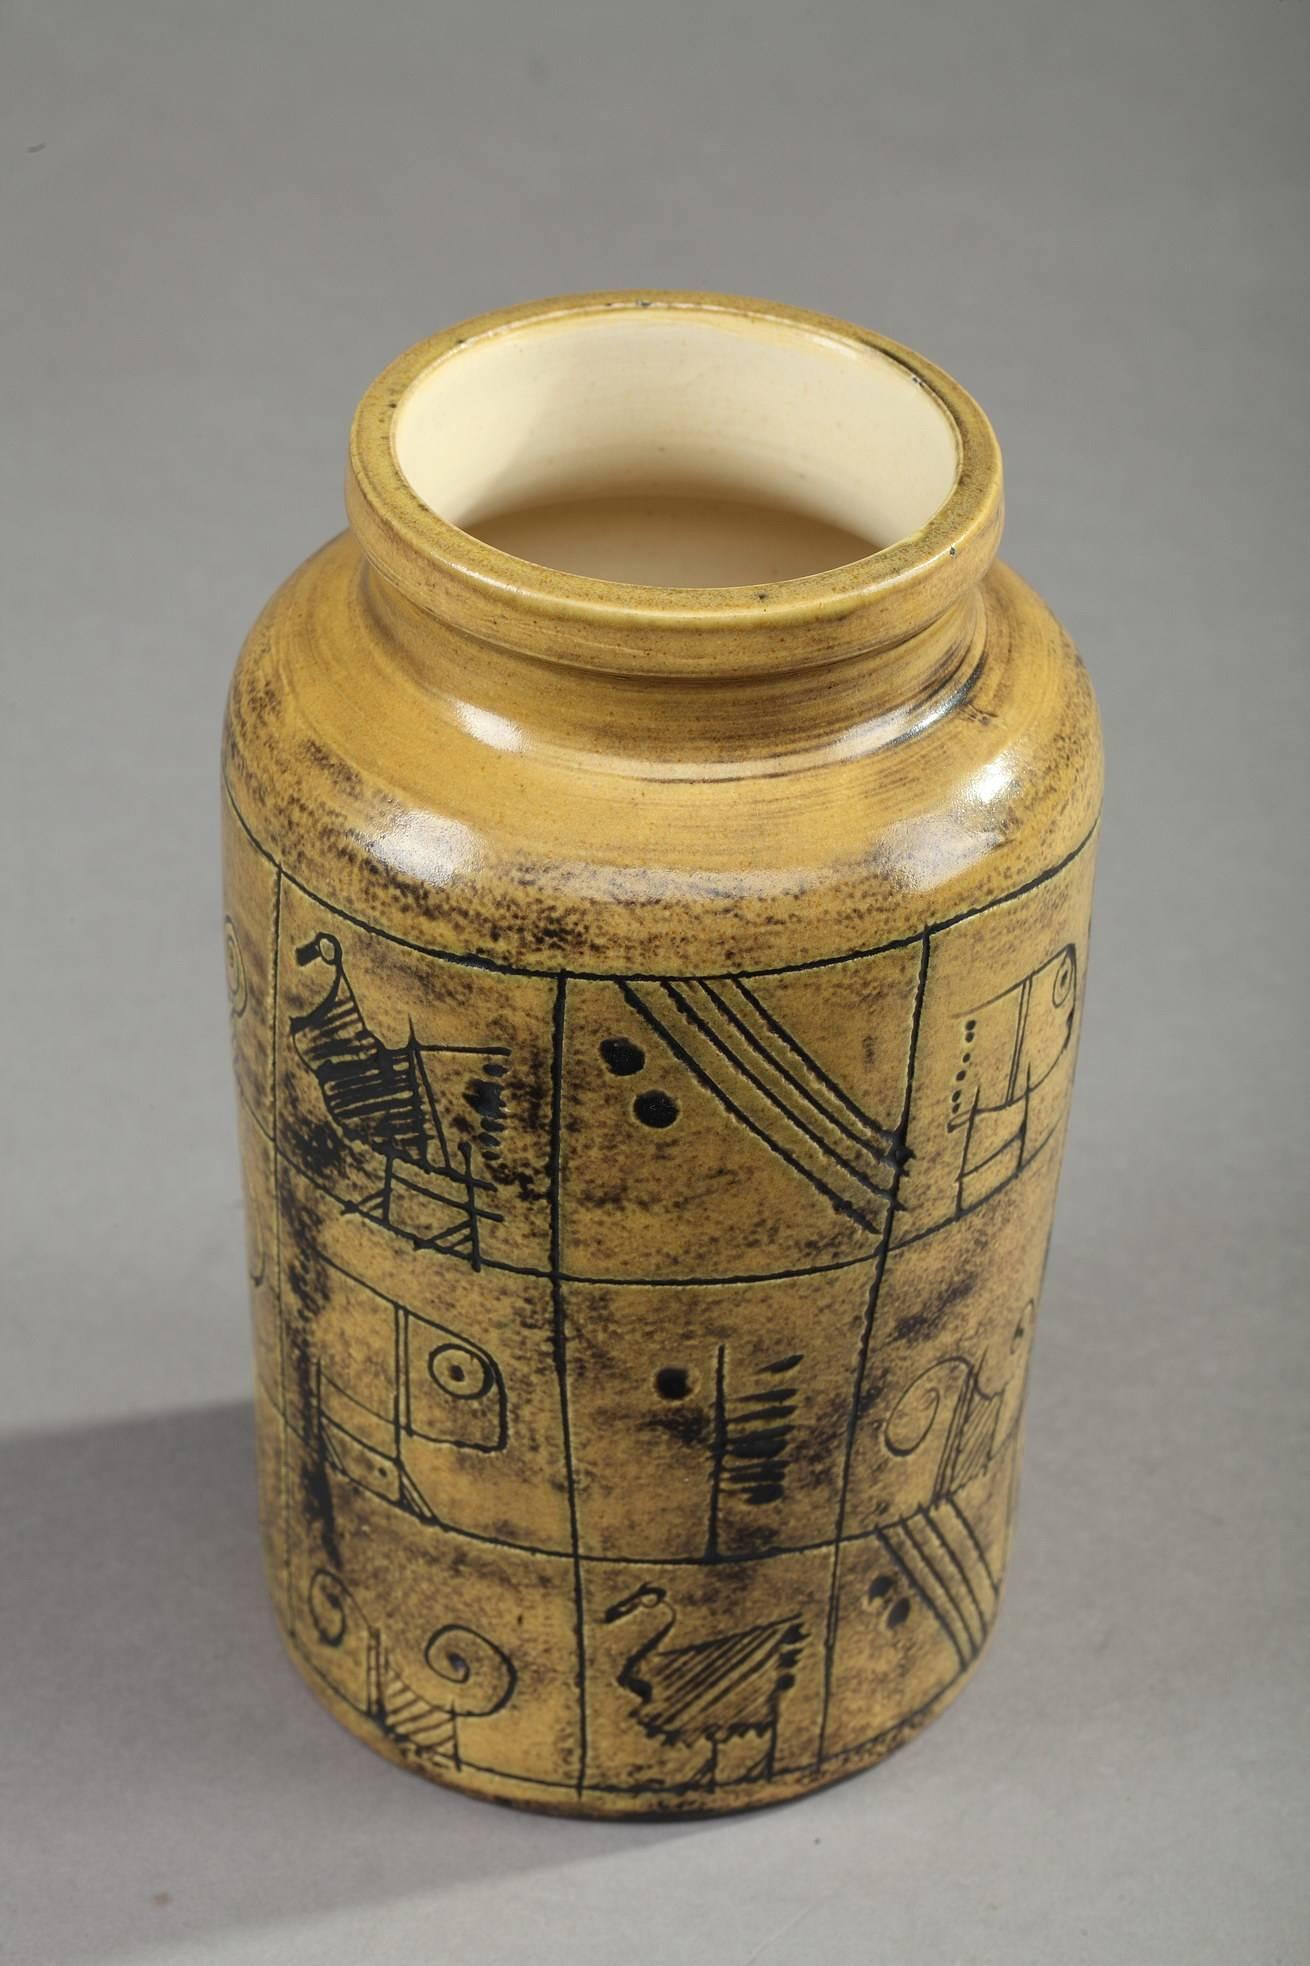 Cylindrical ceramic vase with Primitive style Sgraffito decoration composed of animals and geometrical motives in ochre glaze by noted artist Jacques Blin (French, 1920-1995). Incised signature underside: J. Blin,

circa 1950
Dimensions: W 3.9